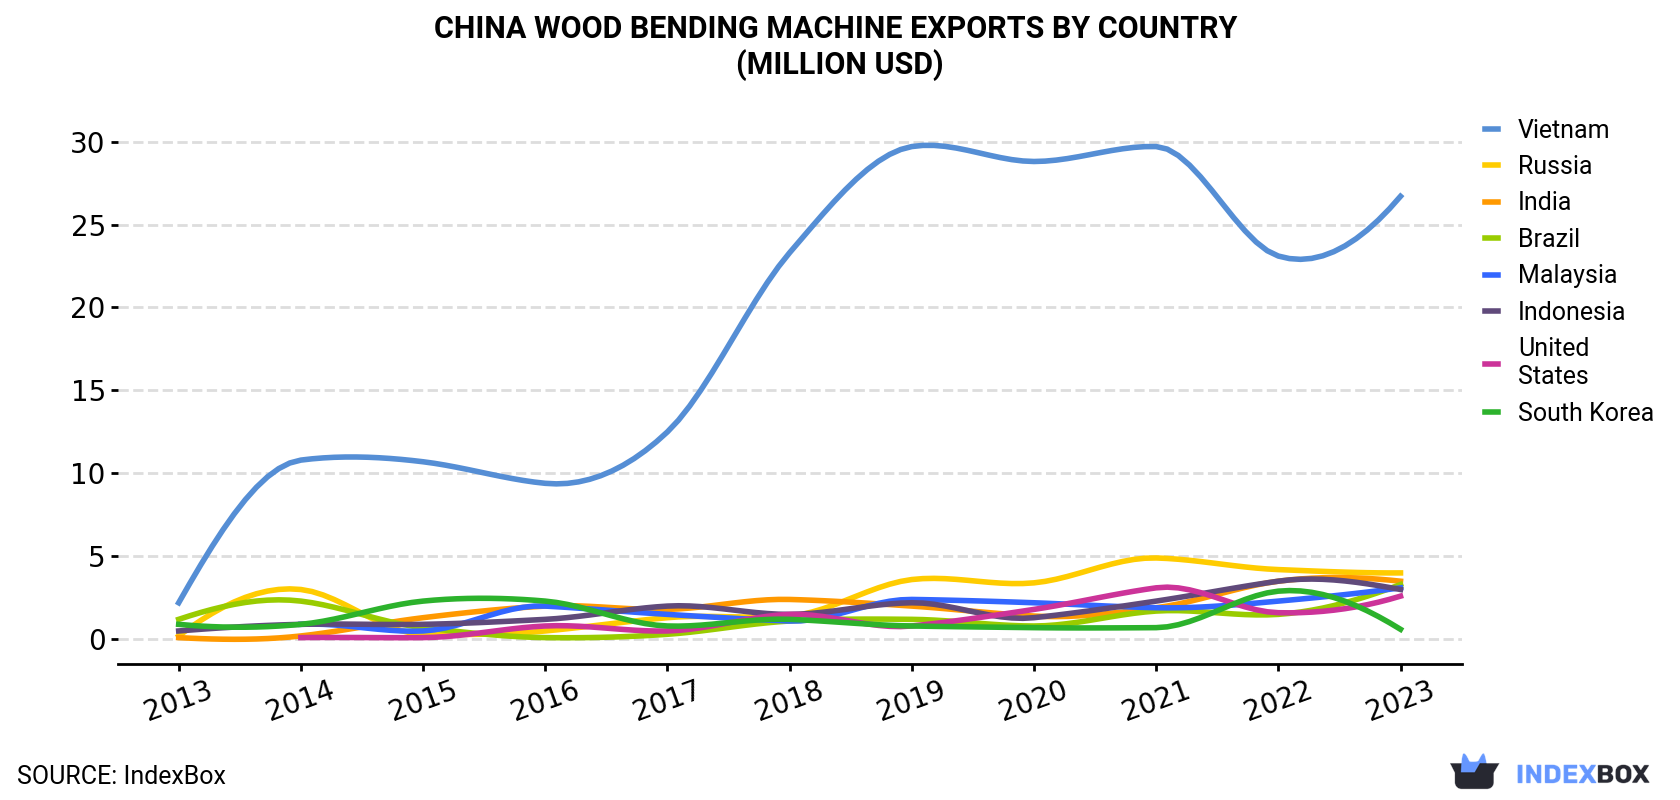 China Wood Bending Machine Exports By Country (Million USD)